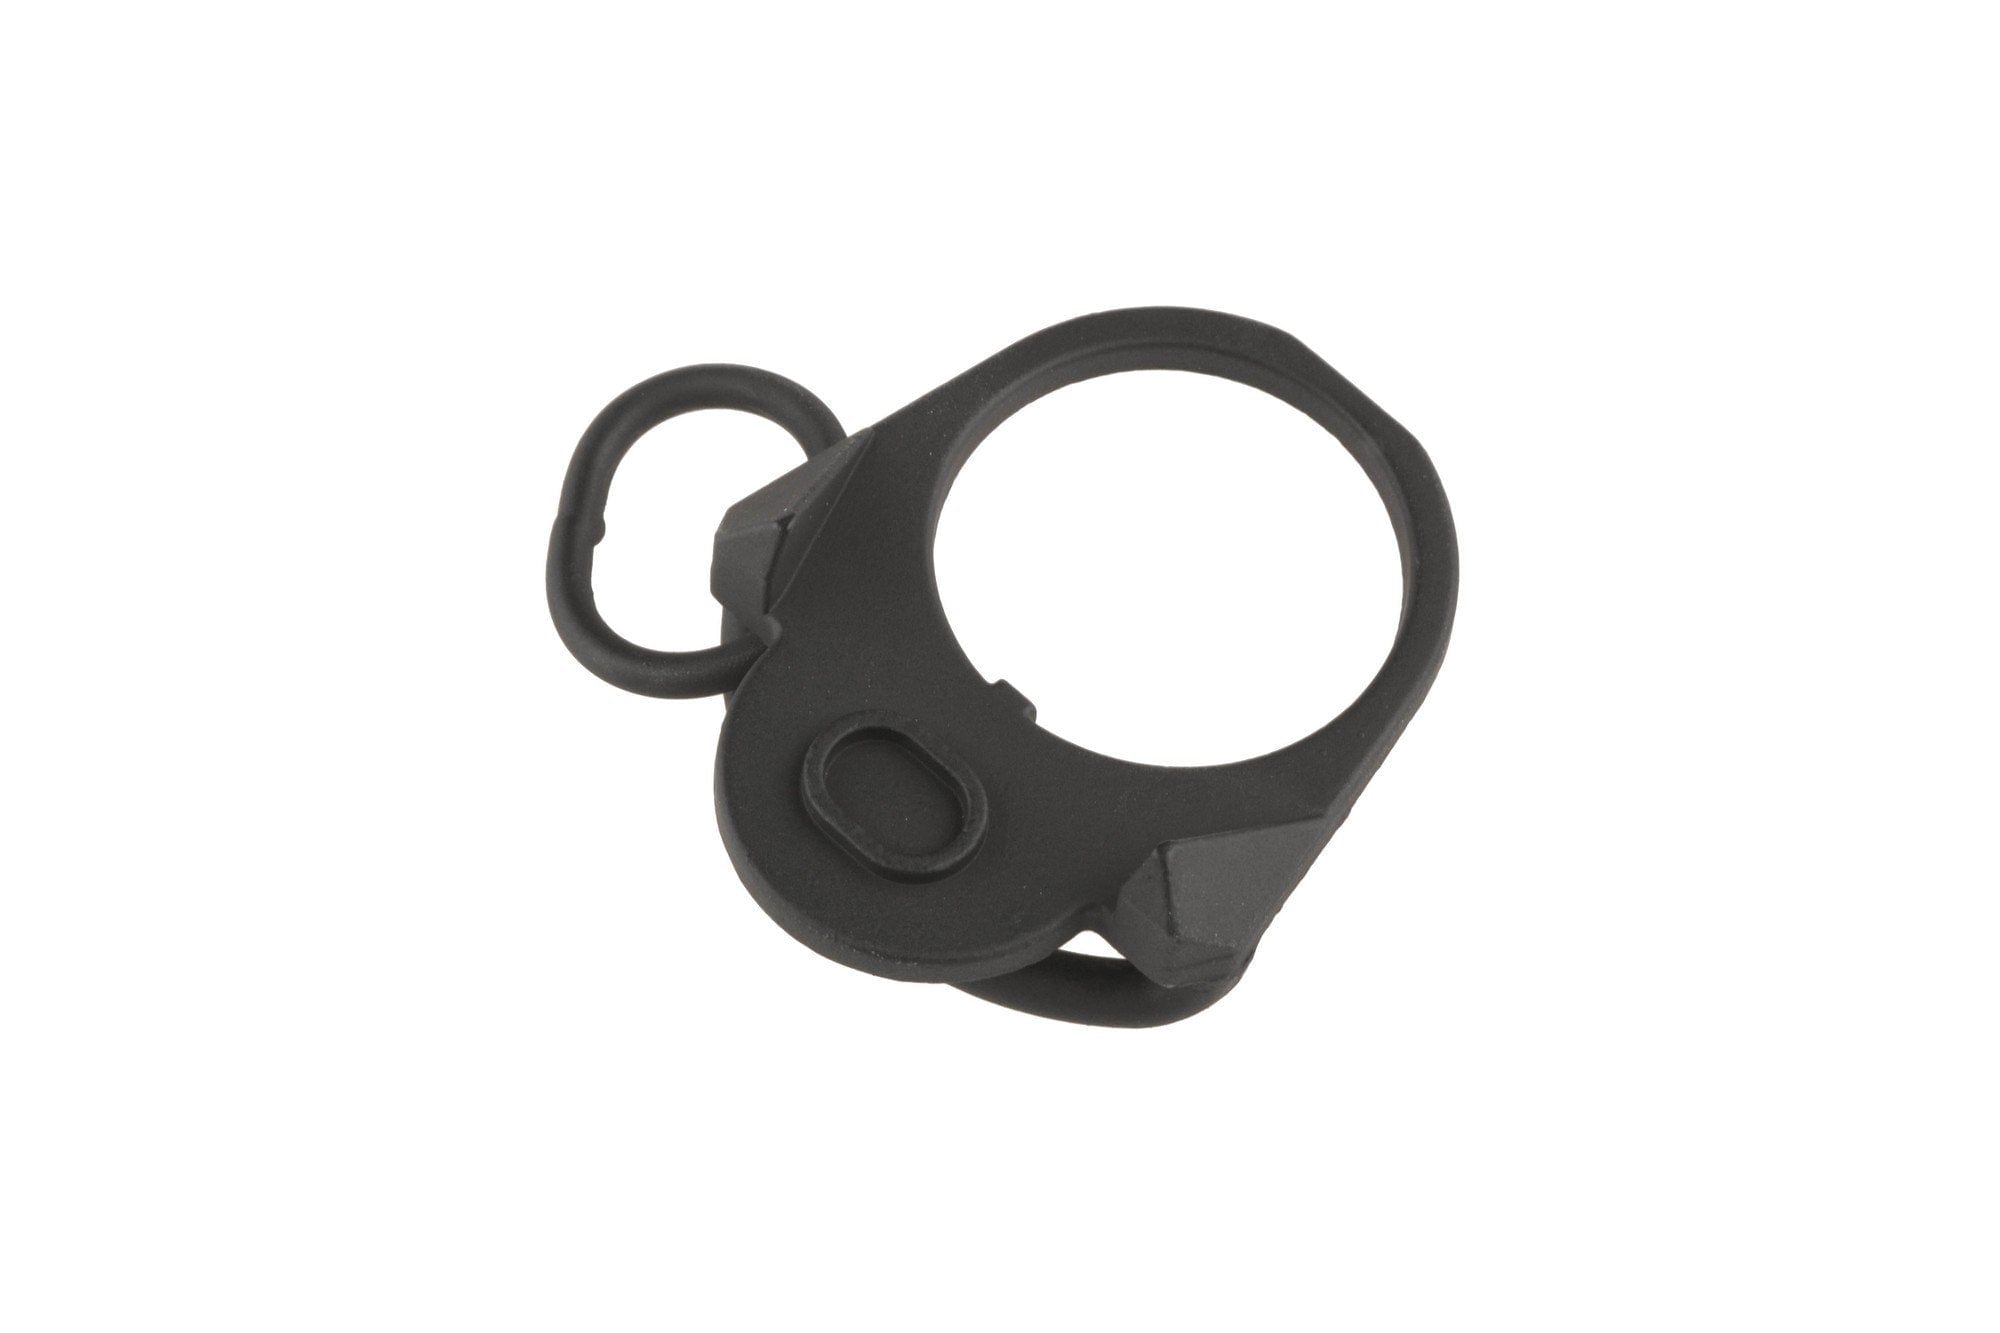 ASP Tactical Sling Swivel for M4/M16 GBB Replicas – Black by SHS on Airsoft Mania Europe